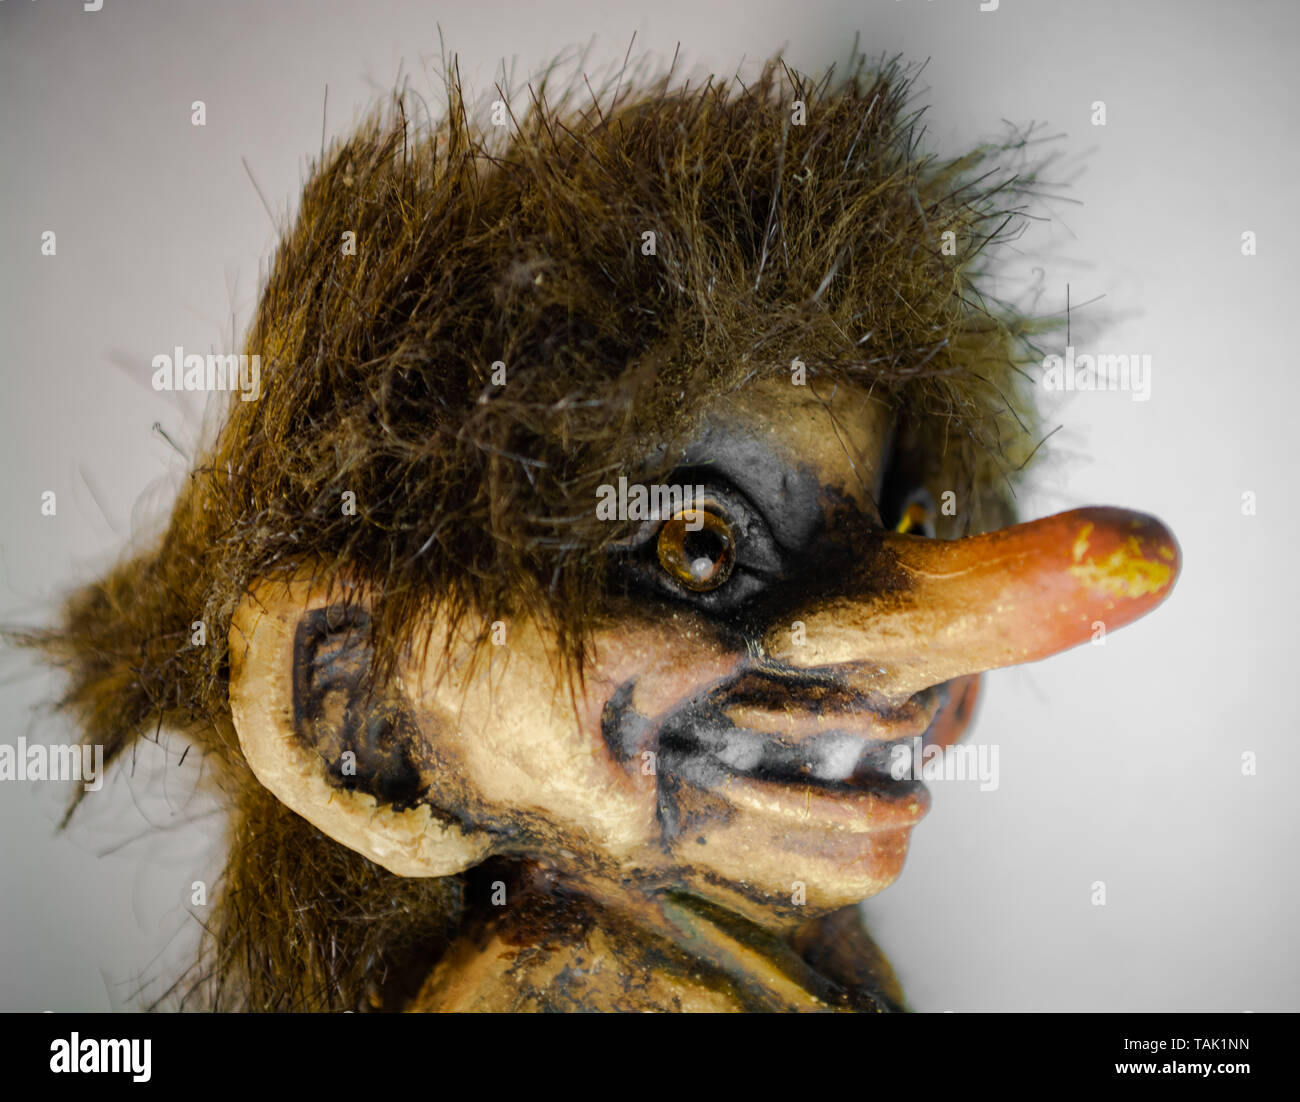 Young Scandinavian troll figure with grin Stock Photo